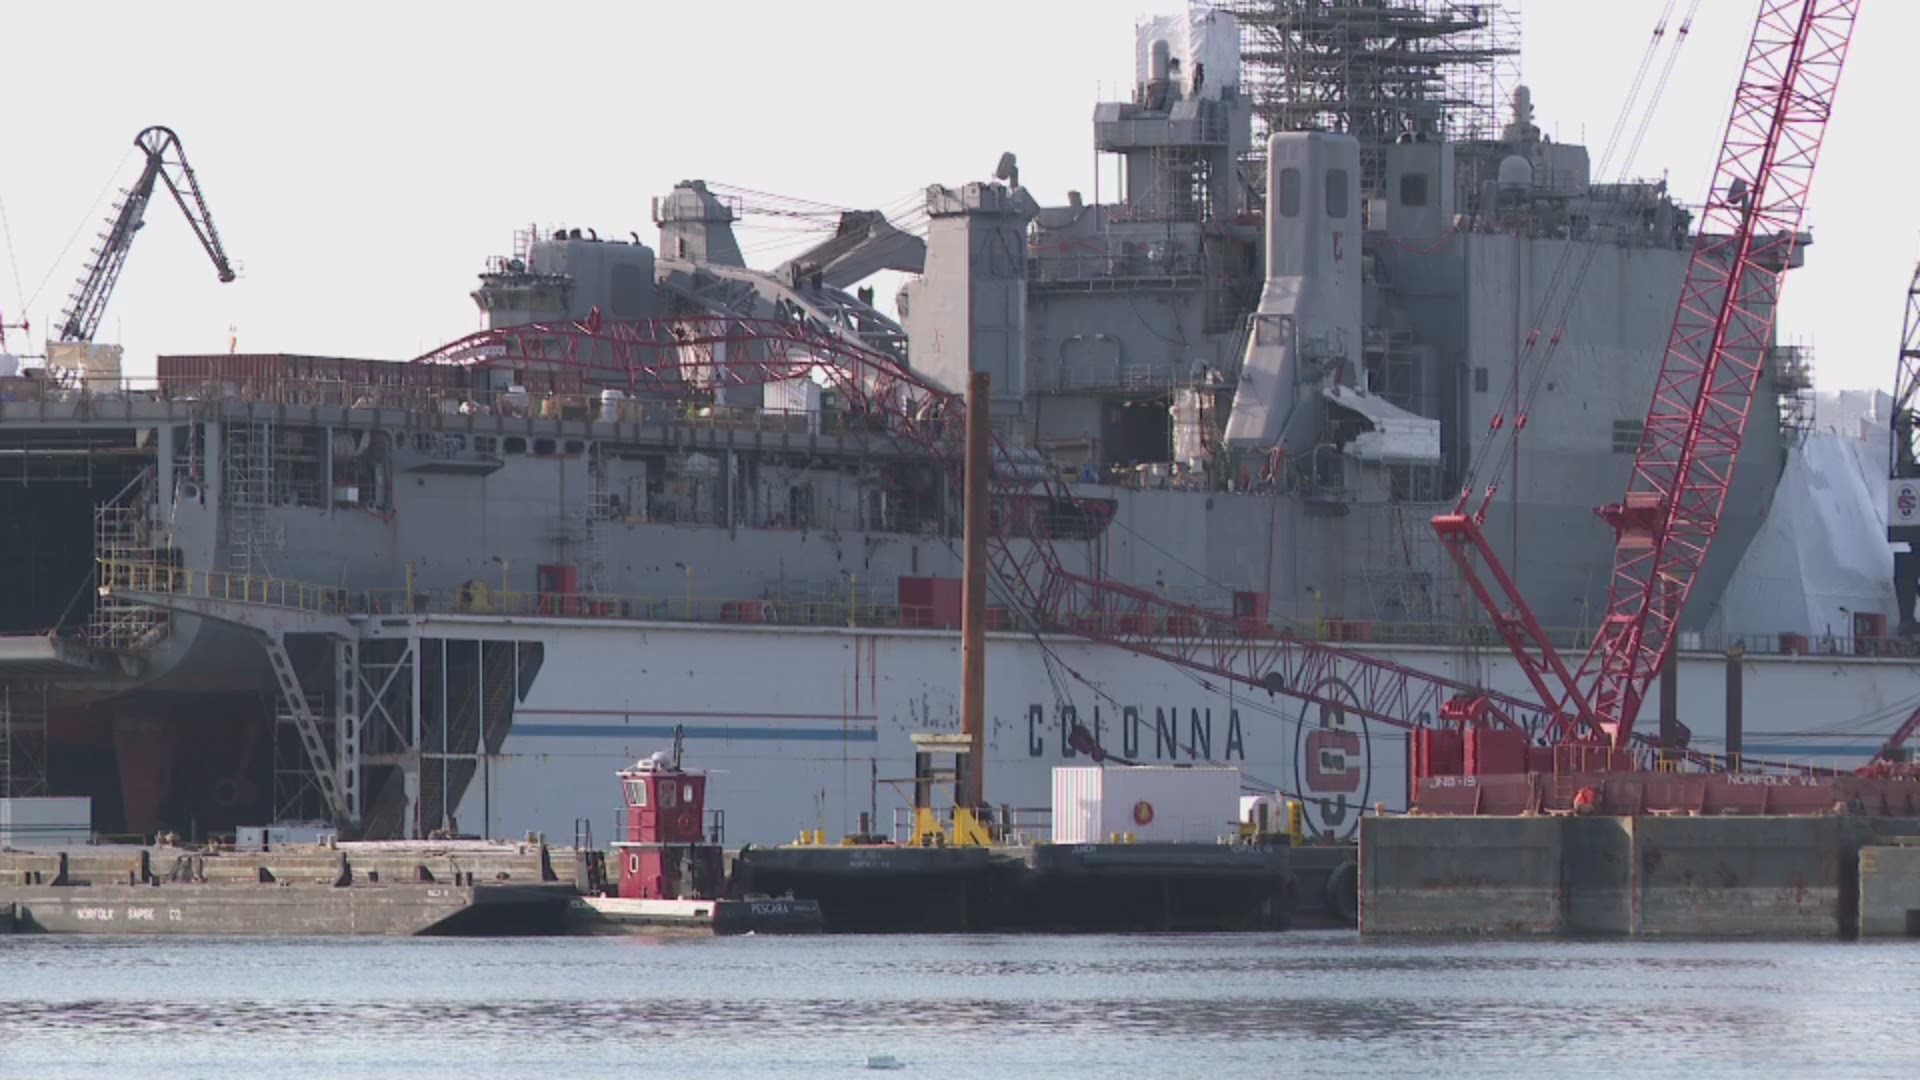 Two sailors were injured when a Colonna's Shipyard crane boom fell onto the USS Gunston Hall, Navy officials said.